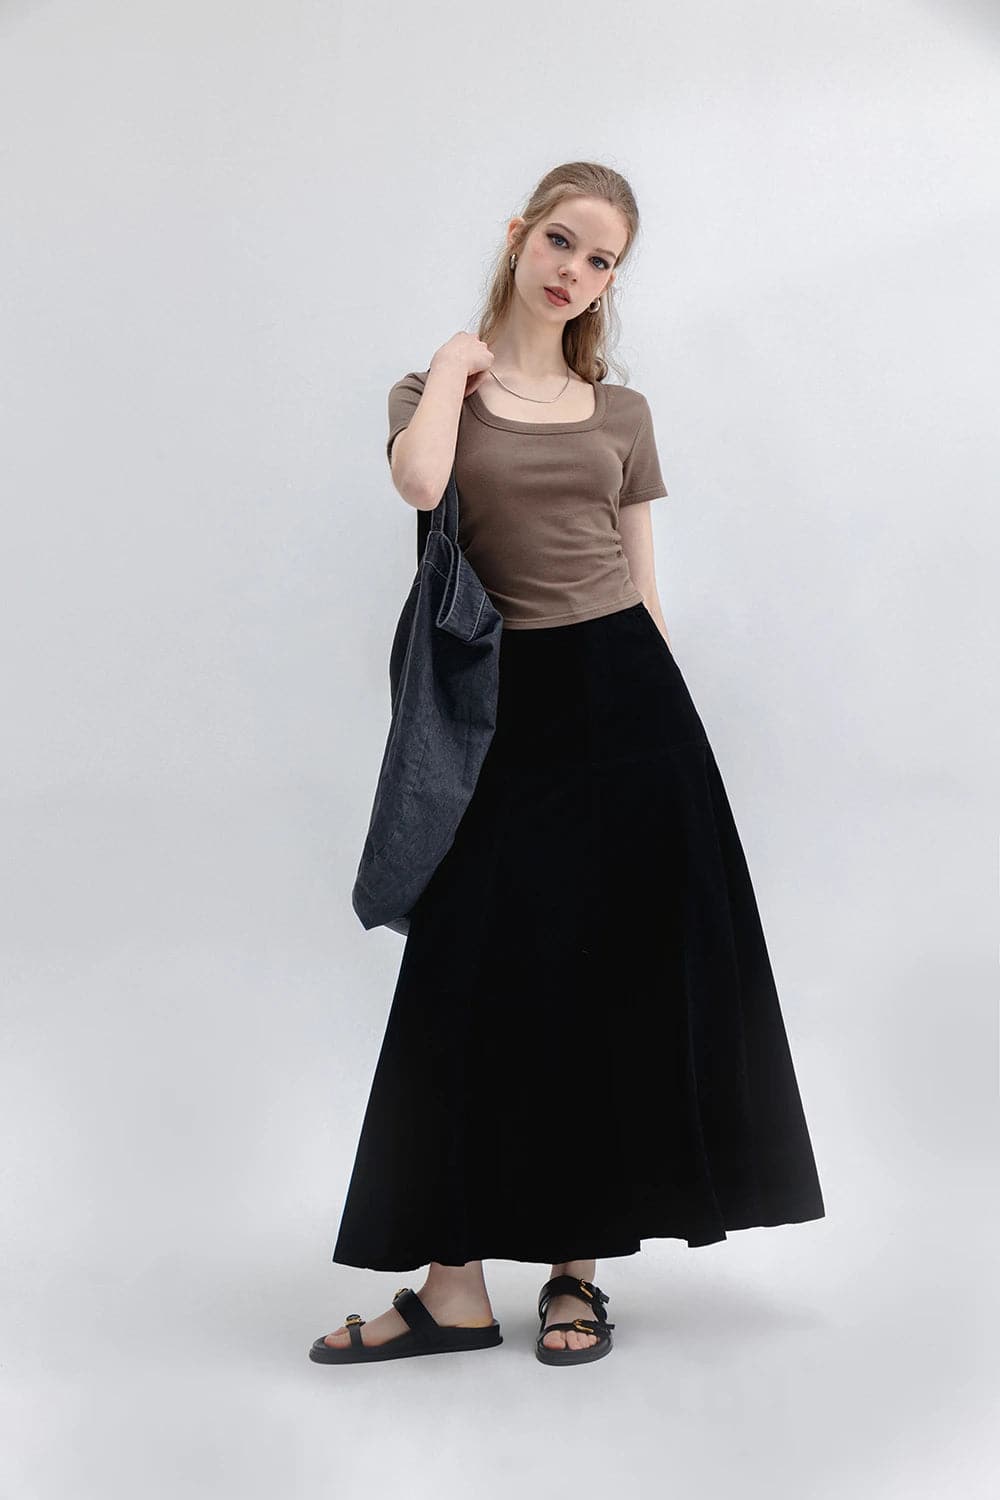 Chic High-Waisted A-Line Skirt with Elegant Flair